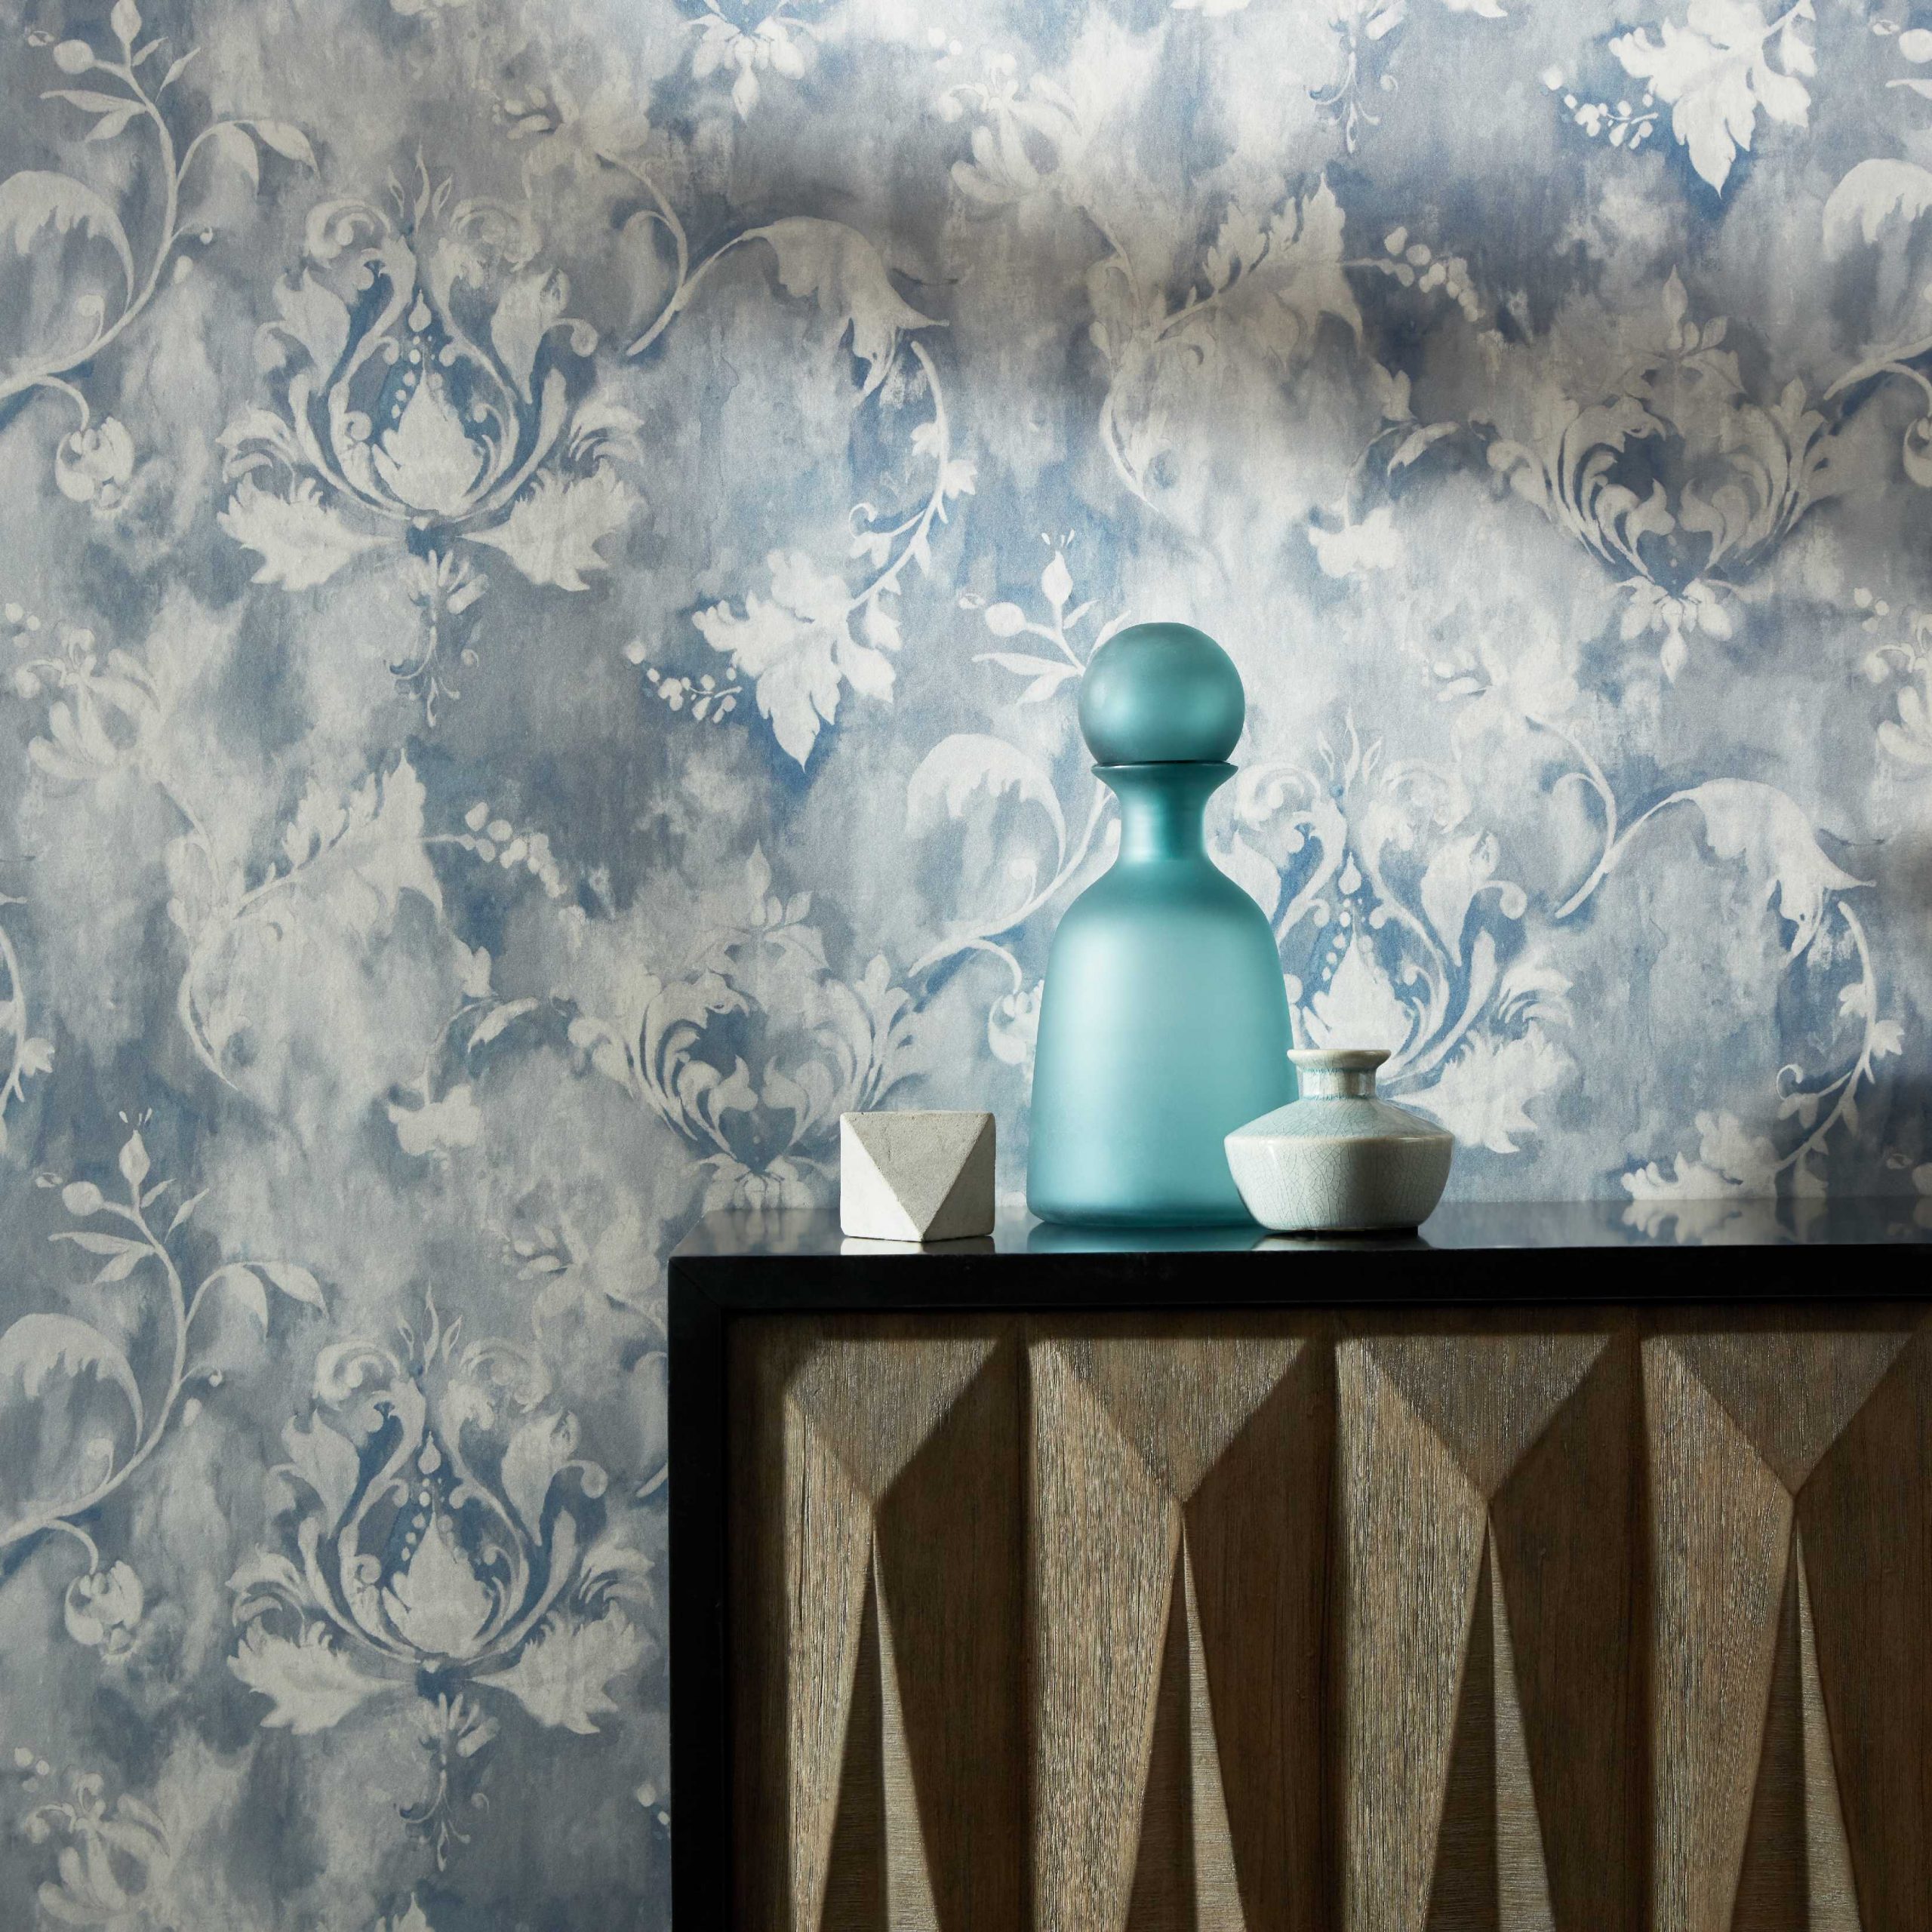 Pewter wallpaper by Erica Wakerly